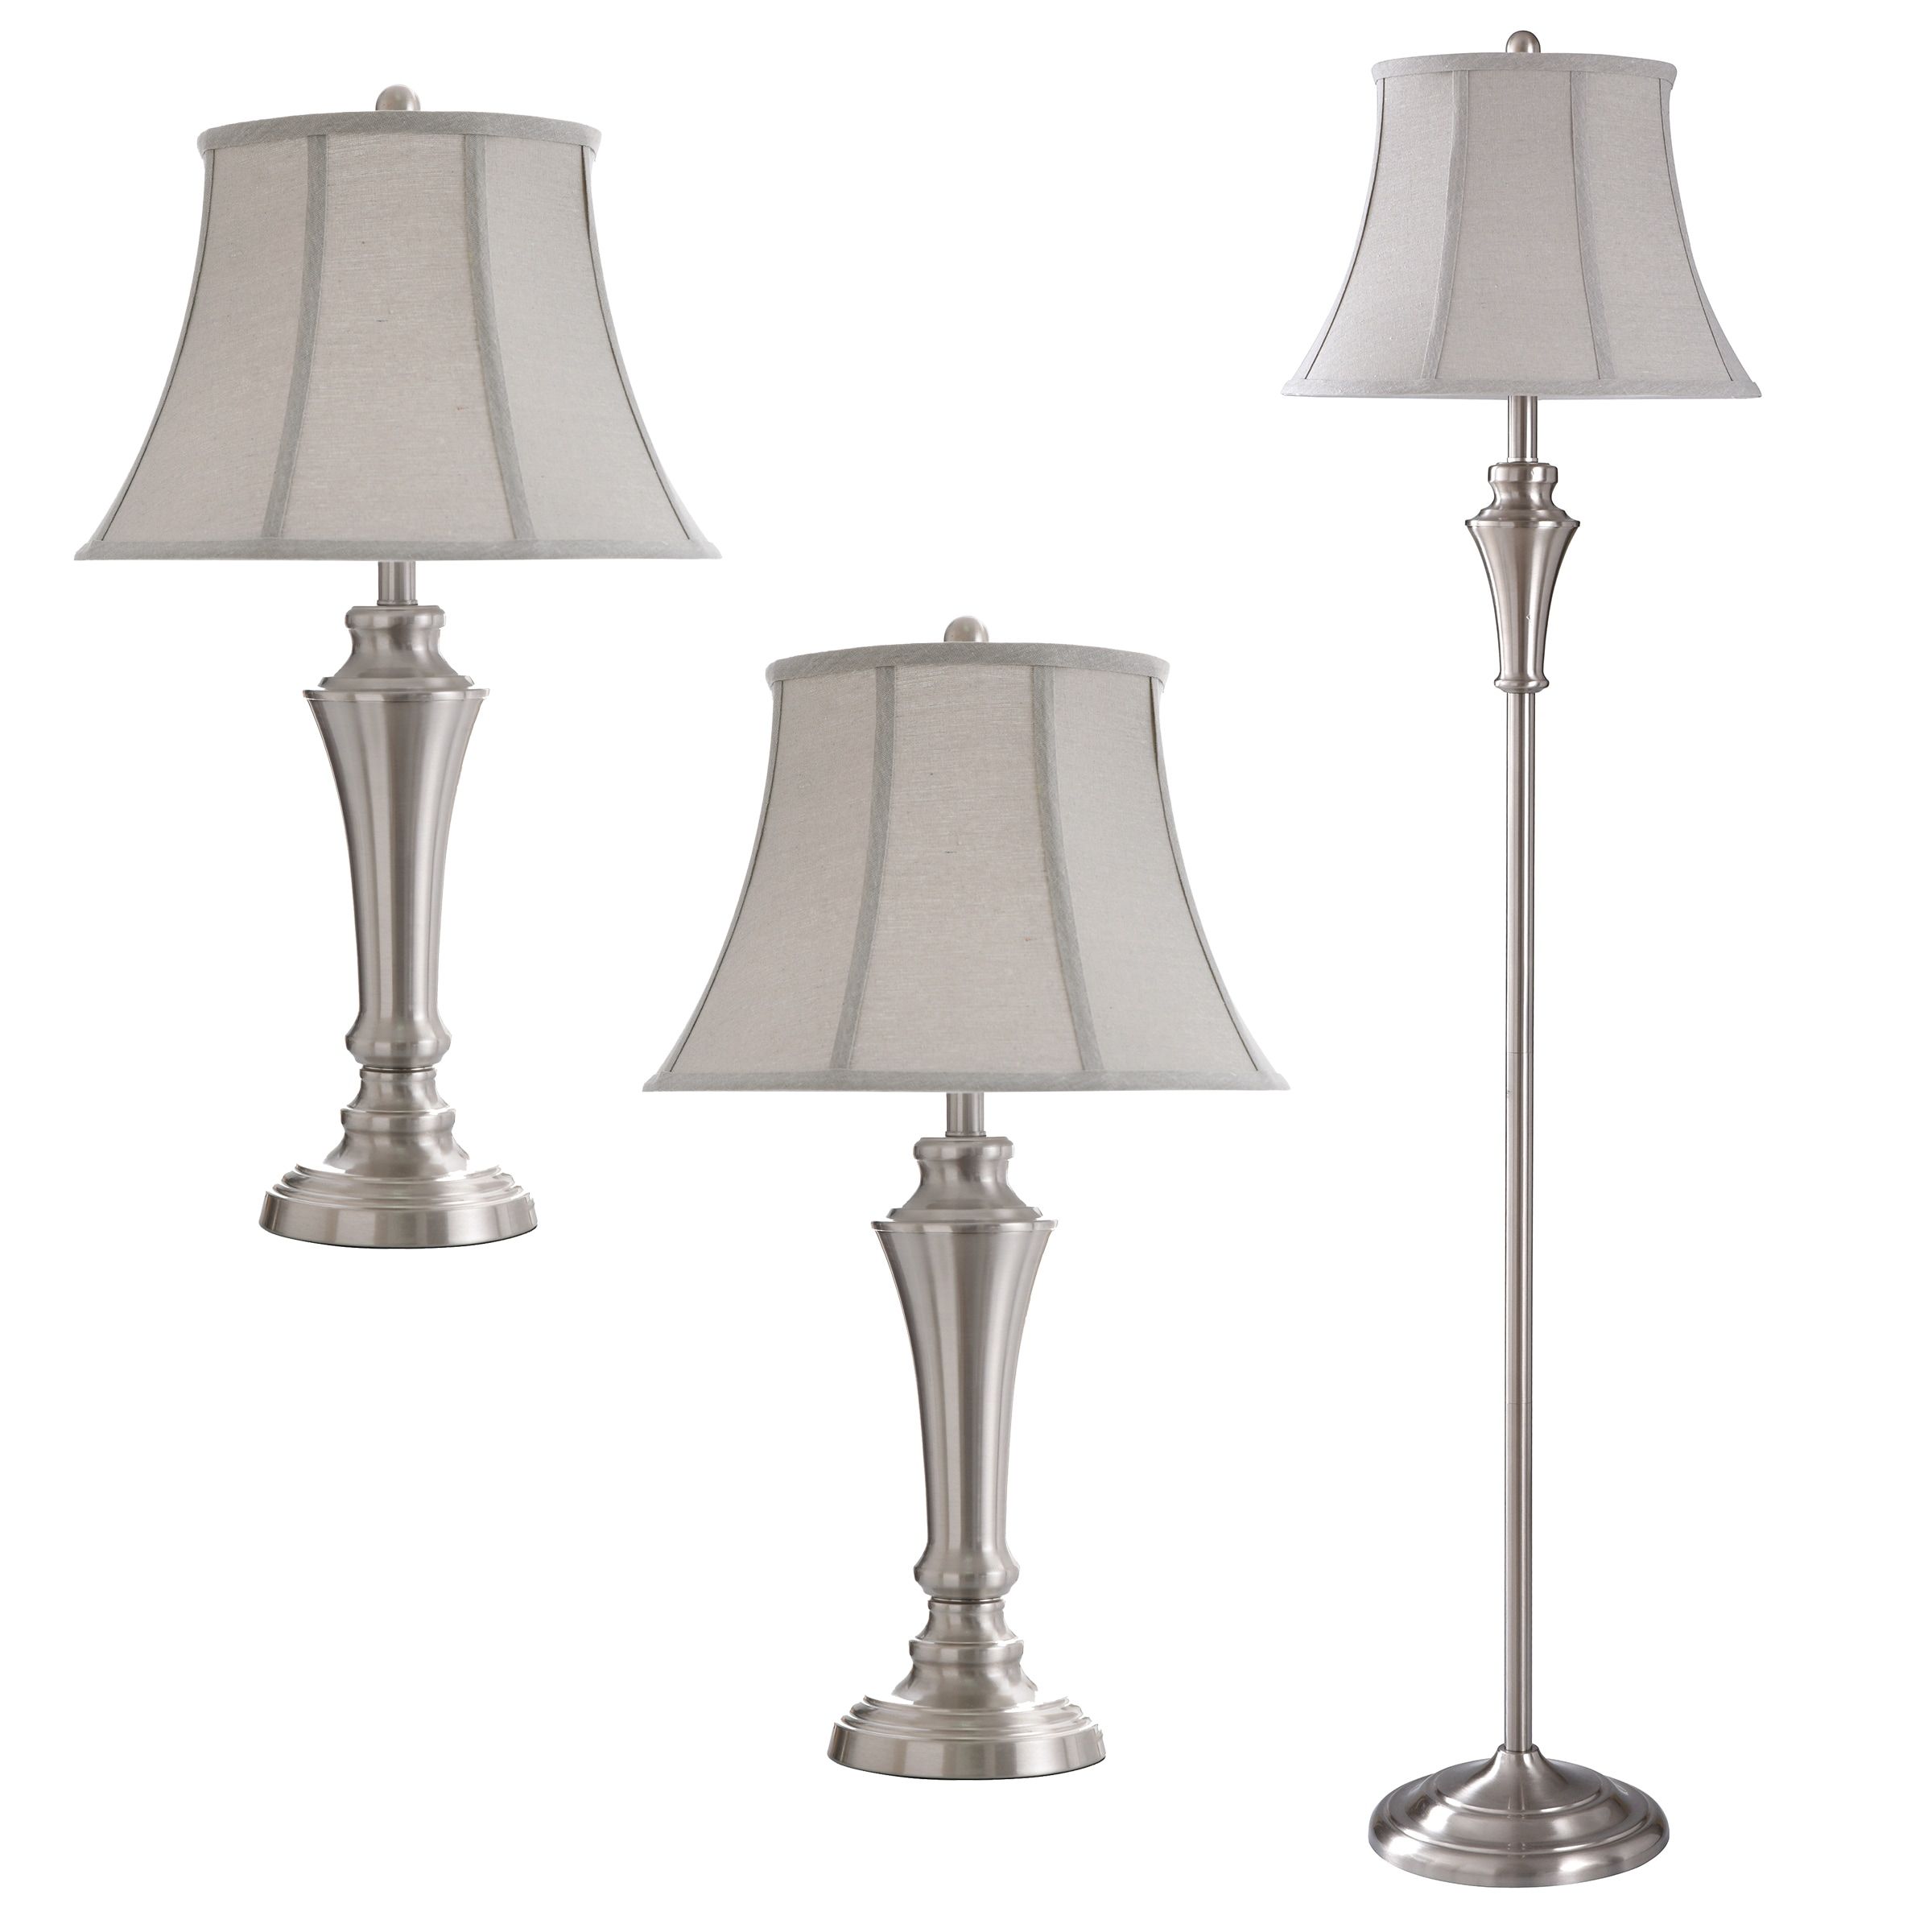 Stylecraft Home Collection Stylecraft Home Collection  Floor Lamp/table Lamp  Set  Brushed Nickel Finish  Geneva Taupe Fabric Shade  3 Piece Set (2  Table, 1 Floor) In The Lamp Sets Department At Lowes With Regard To 3 Piece Set Floor Lamps (Photo 1 of 15)